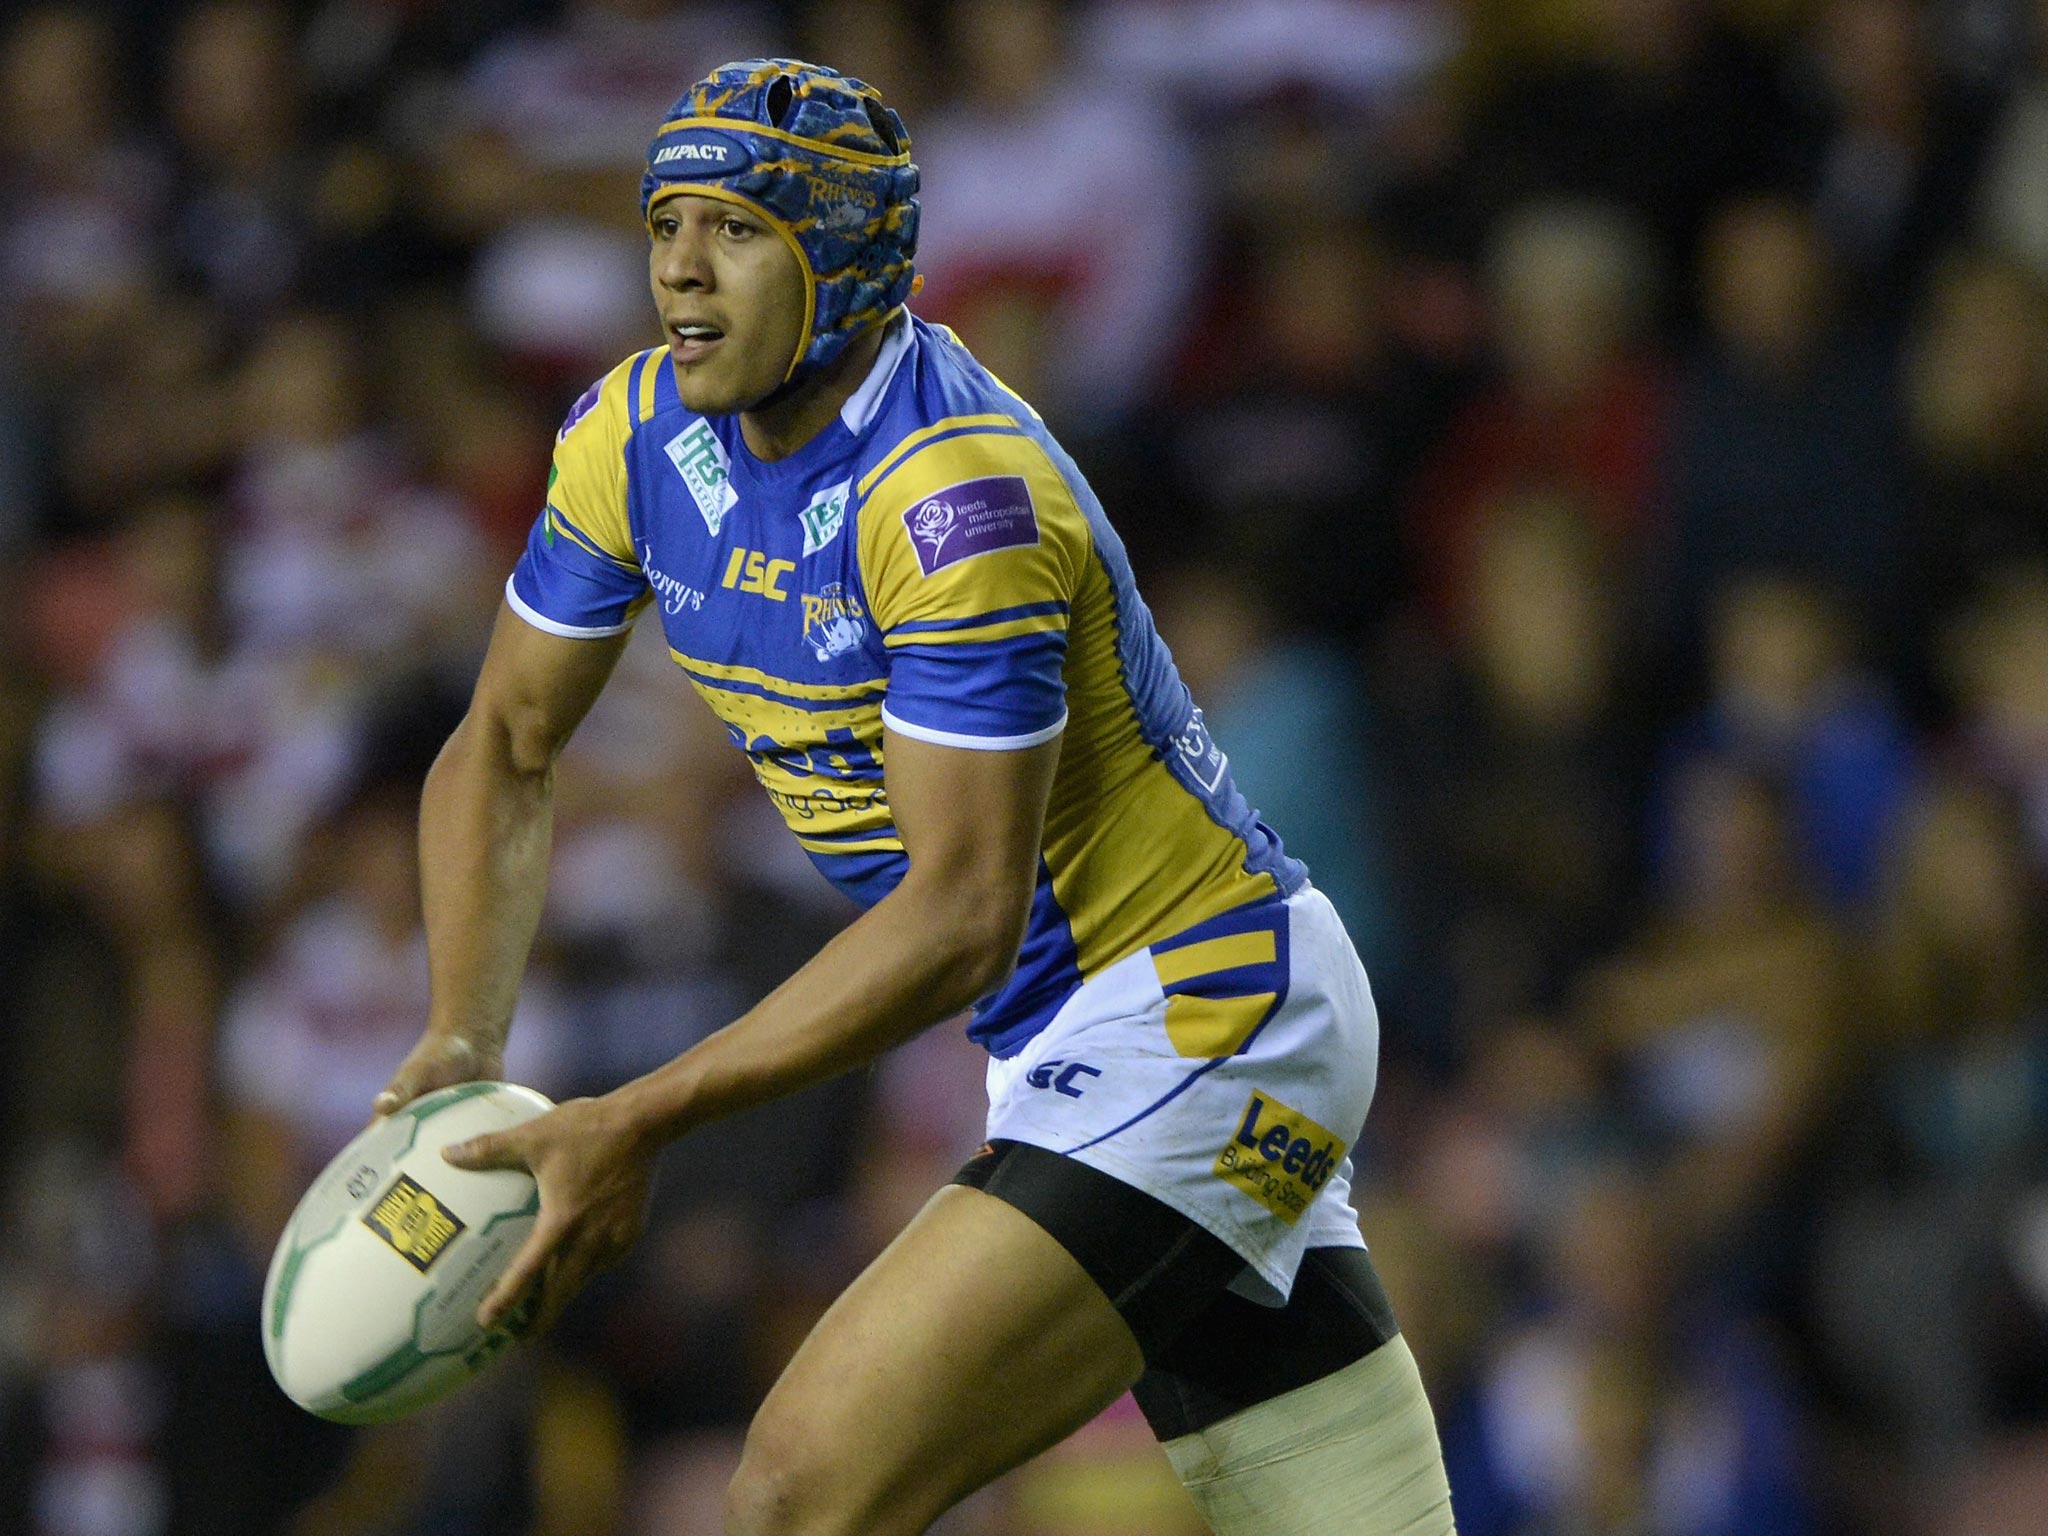 Leeds star Ben Jones-Bishop scored two tries in the win against Castleford to keep his side top